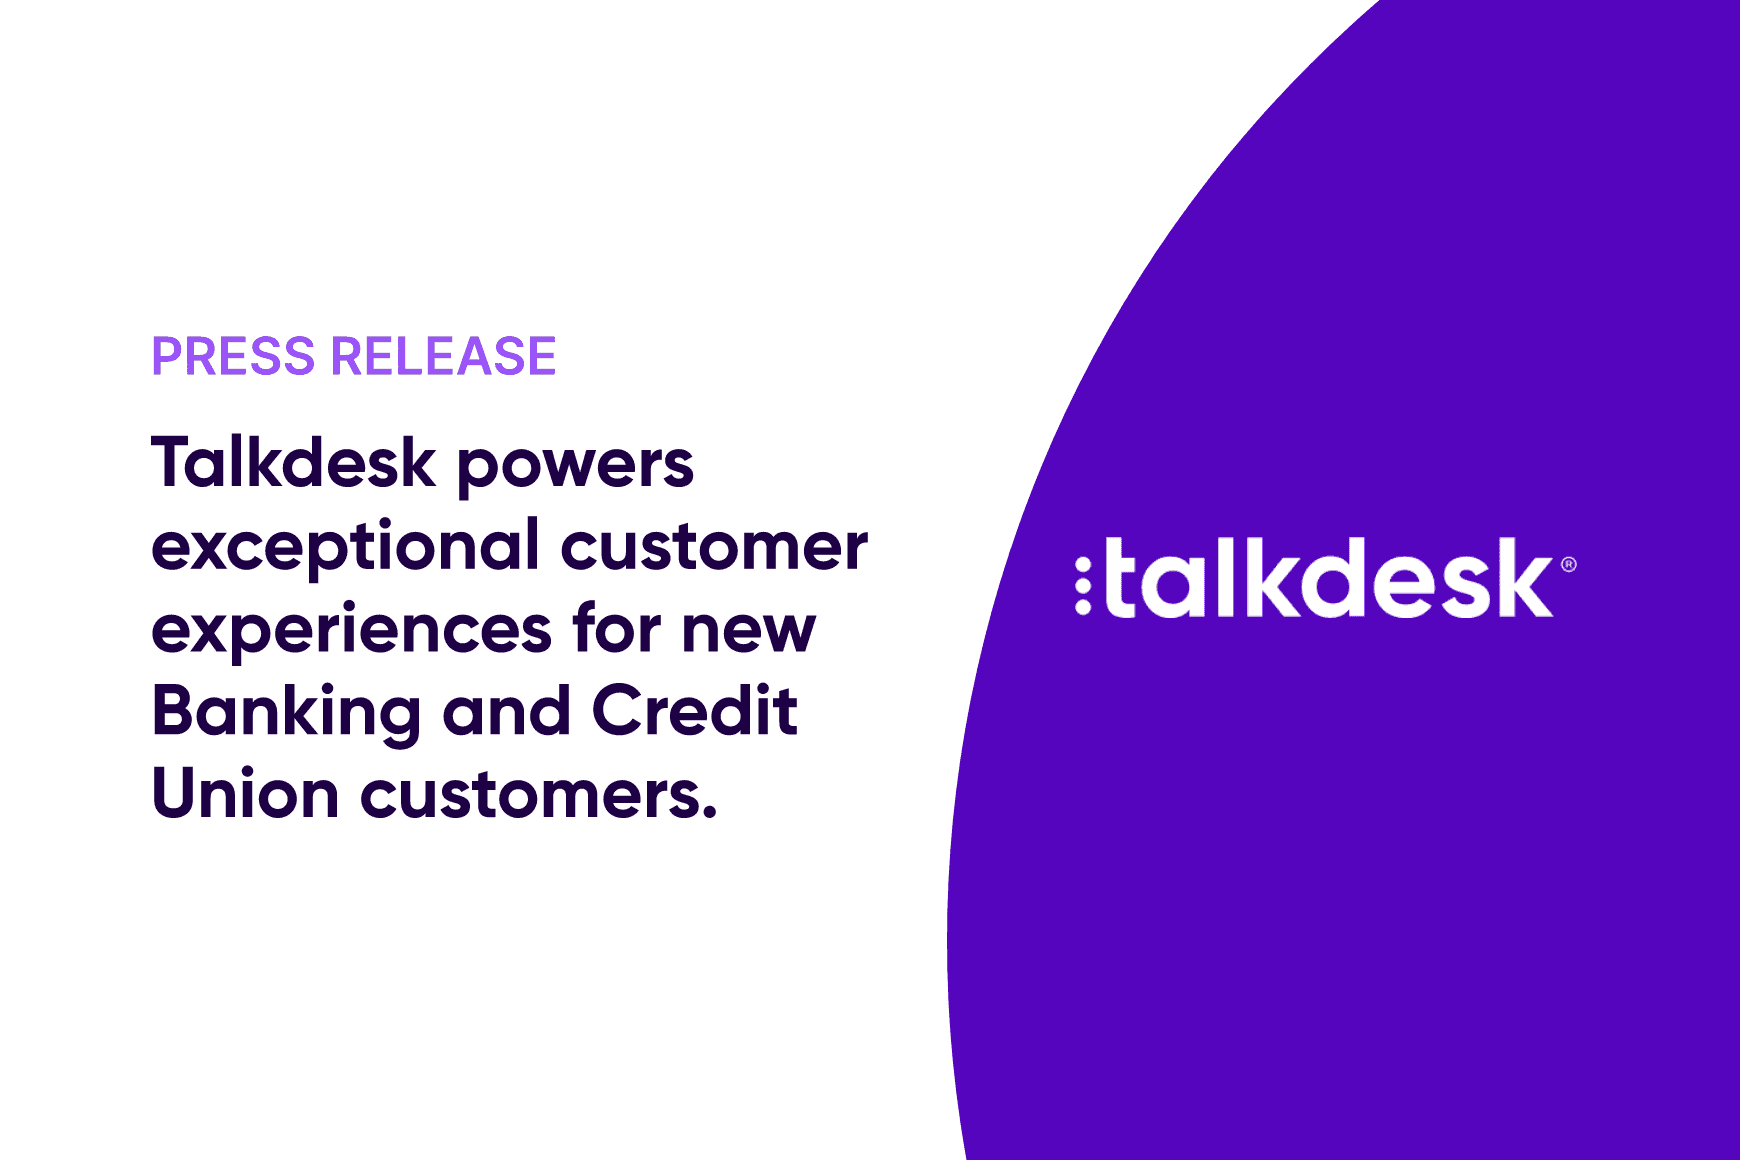 Talkdesk Celebrates Financial Services Momentum, Powers Exceptional Customer Experiences for New Banking and Credit Union Customers